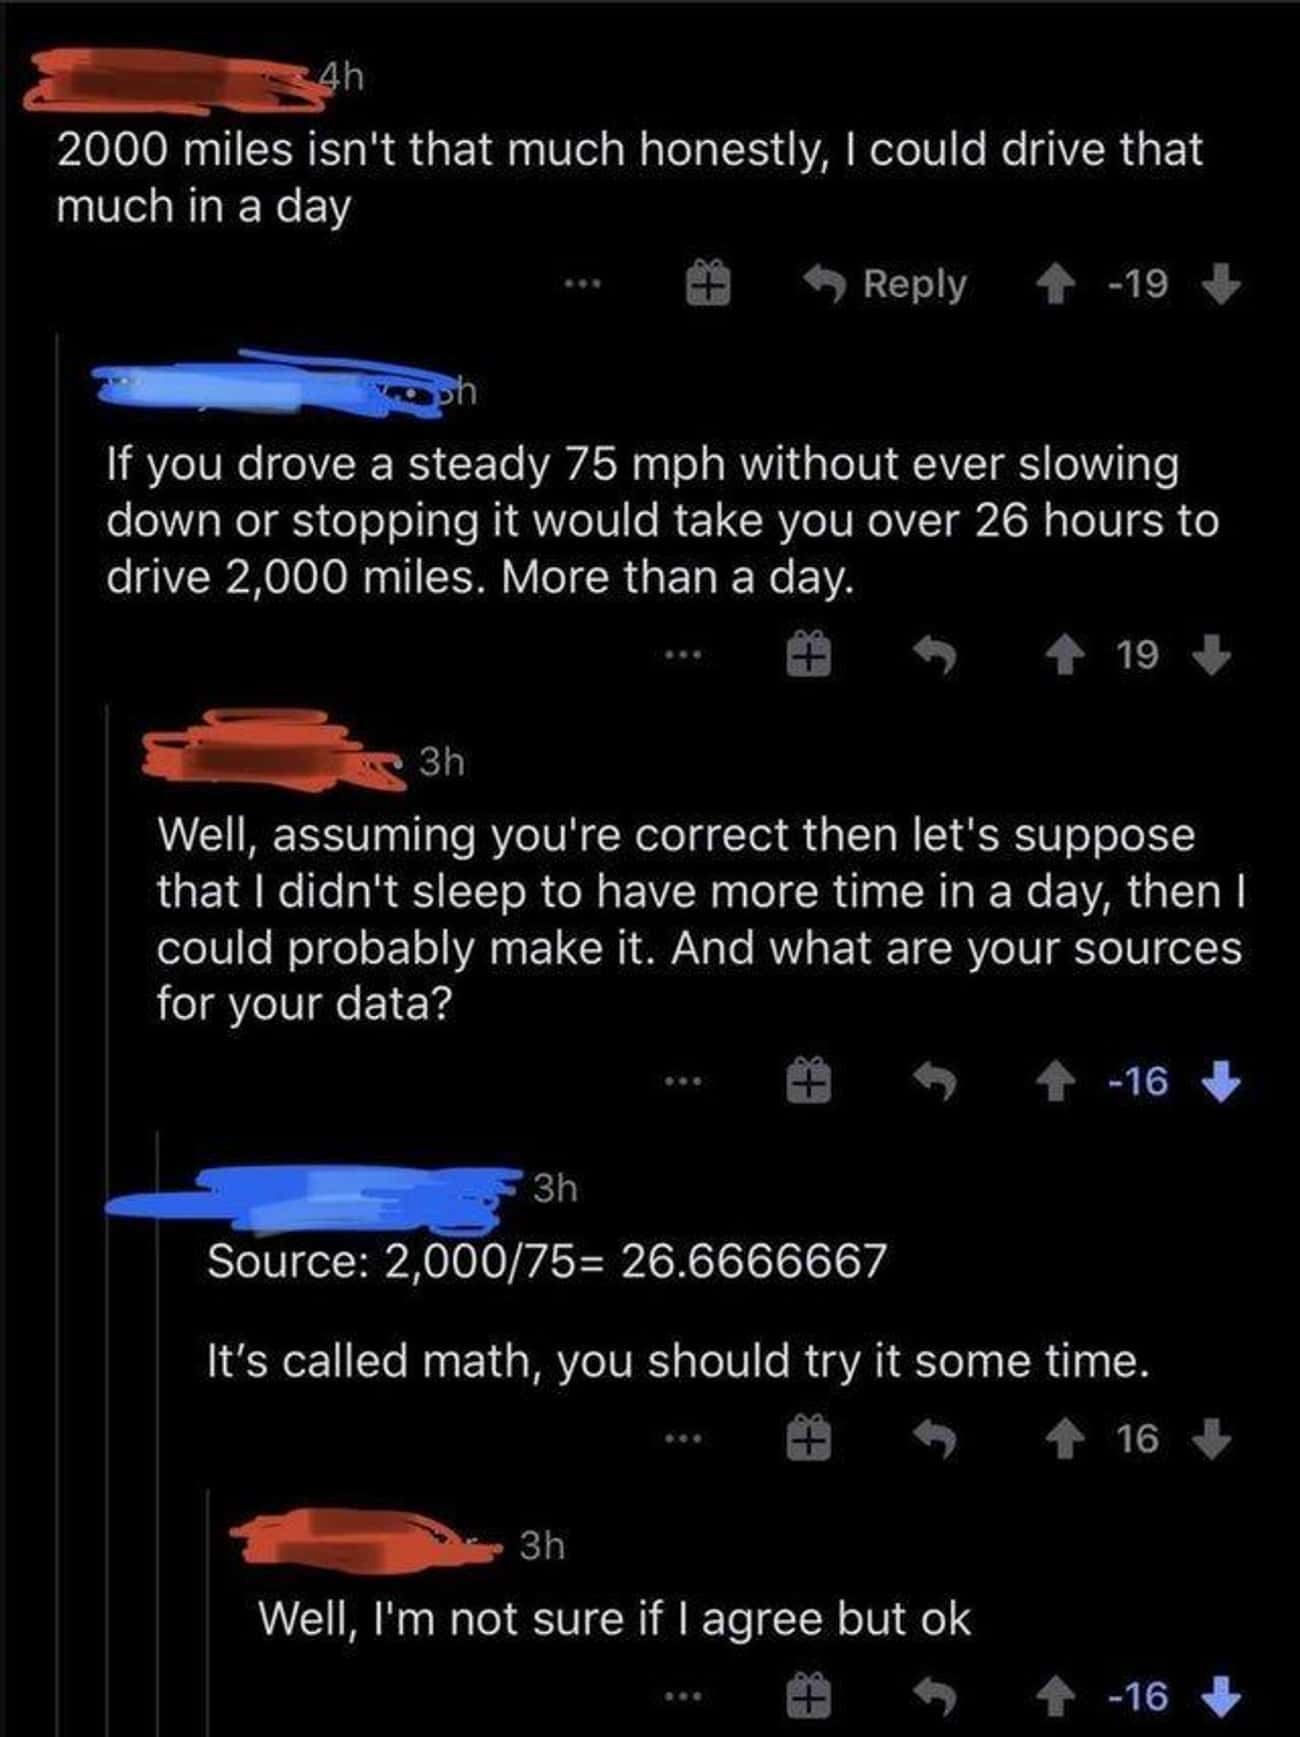 "It's Called Math, You Should Try It Sometime"